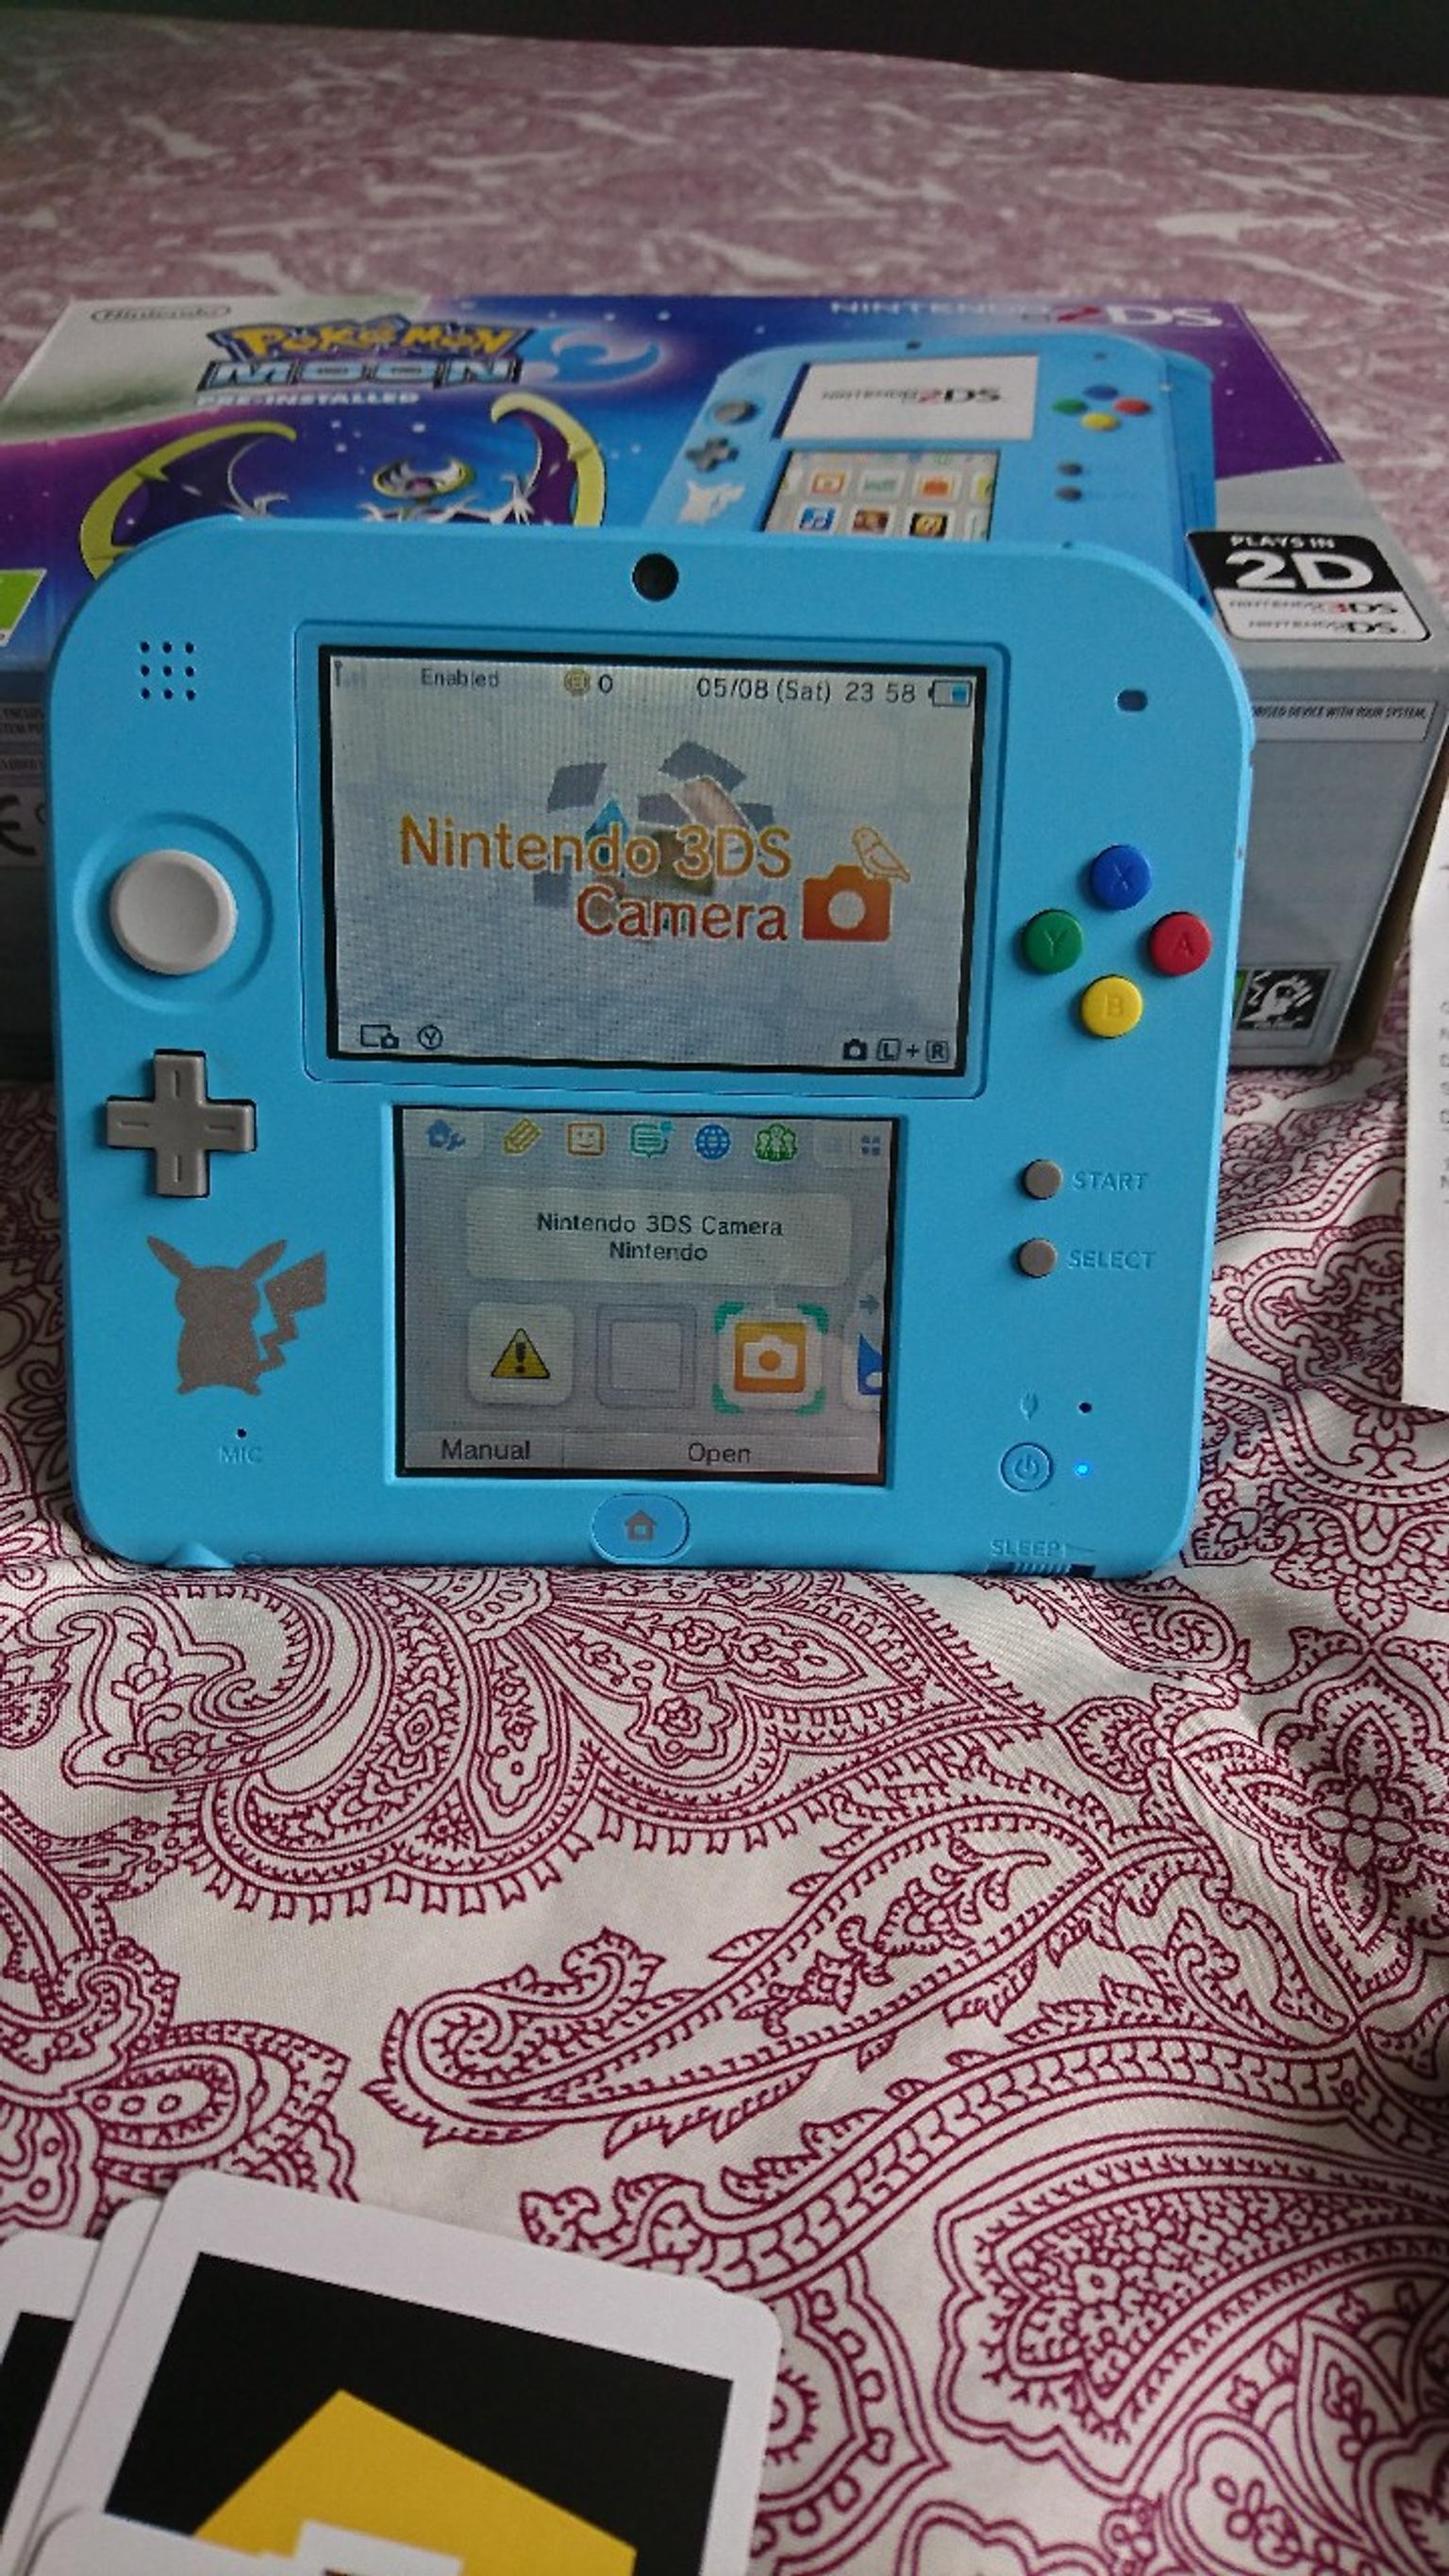 Pokemon Moon 2ds In Wa8 Widnes For 60 00 For Sale Shpock